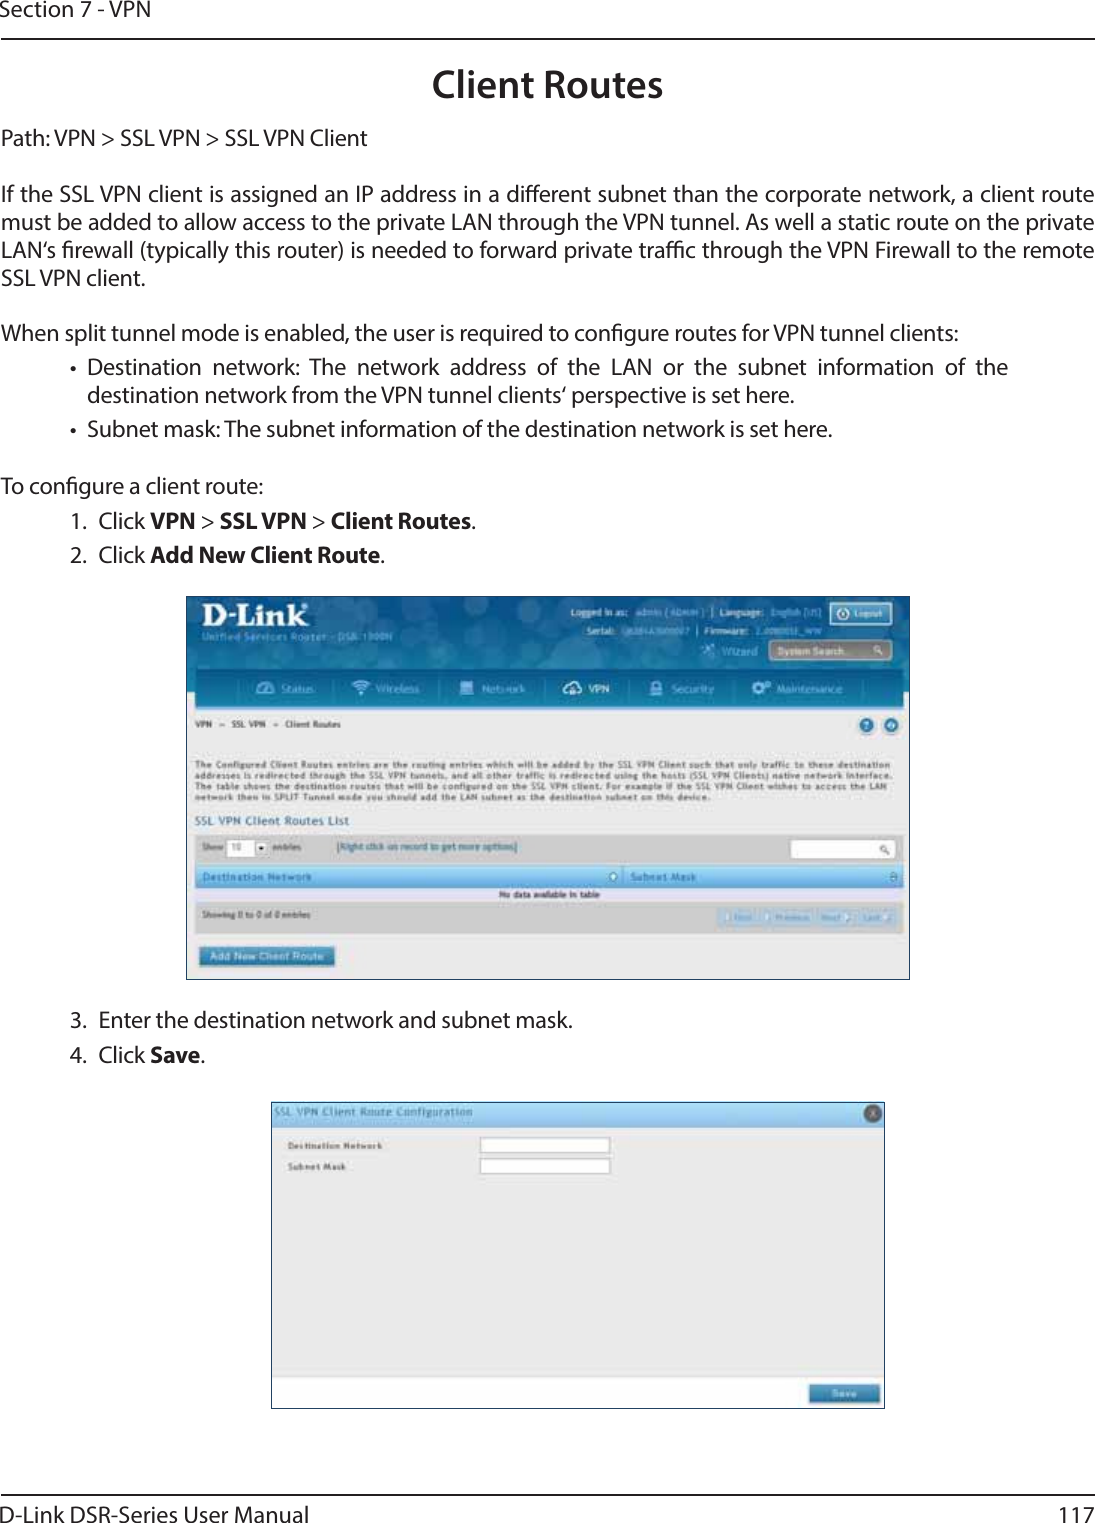 D-Link DSR-Series User Manual 117Section 7 - VPNClient RoutesPath: VPN &gt; SSL VPN &gt; SSL VPN ClientIf the SSL VPN client is assigned an IP address in a dierent subnet than the corporate network, a client route must be added to allow access to the private LAN through the VPN tunnel. As well a static route on the private LAN‘s rewall (typically this router) is needed to forward private trac through the VPN Firewall to the remote SSL VPN client.When split tunnel mode is enabled, the user is required to congure routes for VPN tunnel clients:• Destination network: The network address of the LAN or the subnet information of the destination network from the VPN tunnel clients‘ perspective is set here.•  Subnet mask: The subnet information of the destination network is set here.To congure a client route:1. Click VPN &gt; SSL VPN &gt; Client Routes.2. Click Add New Client Route.3.  Enter the destination network and subnet mask.4. Click Save.